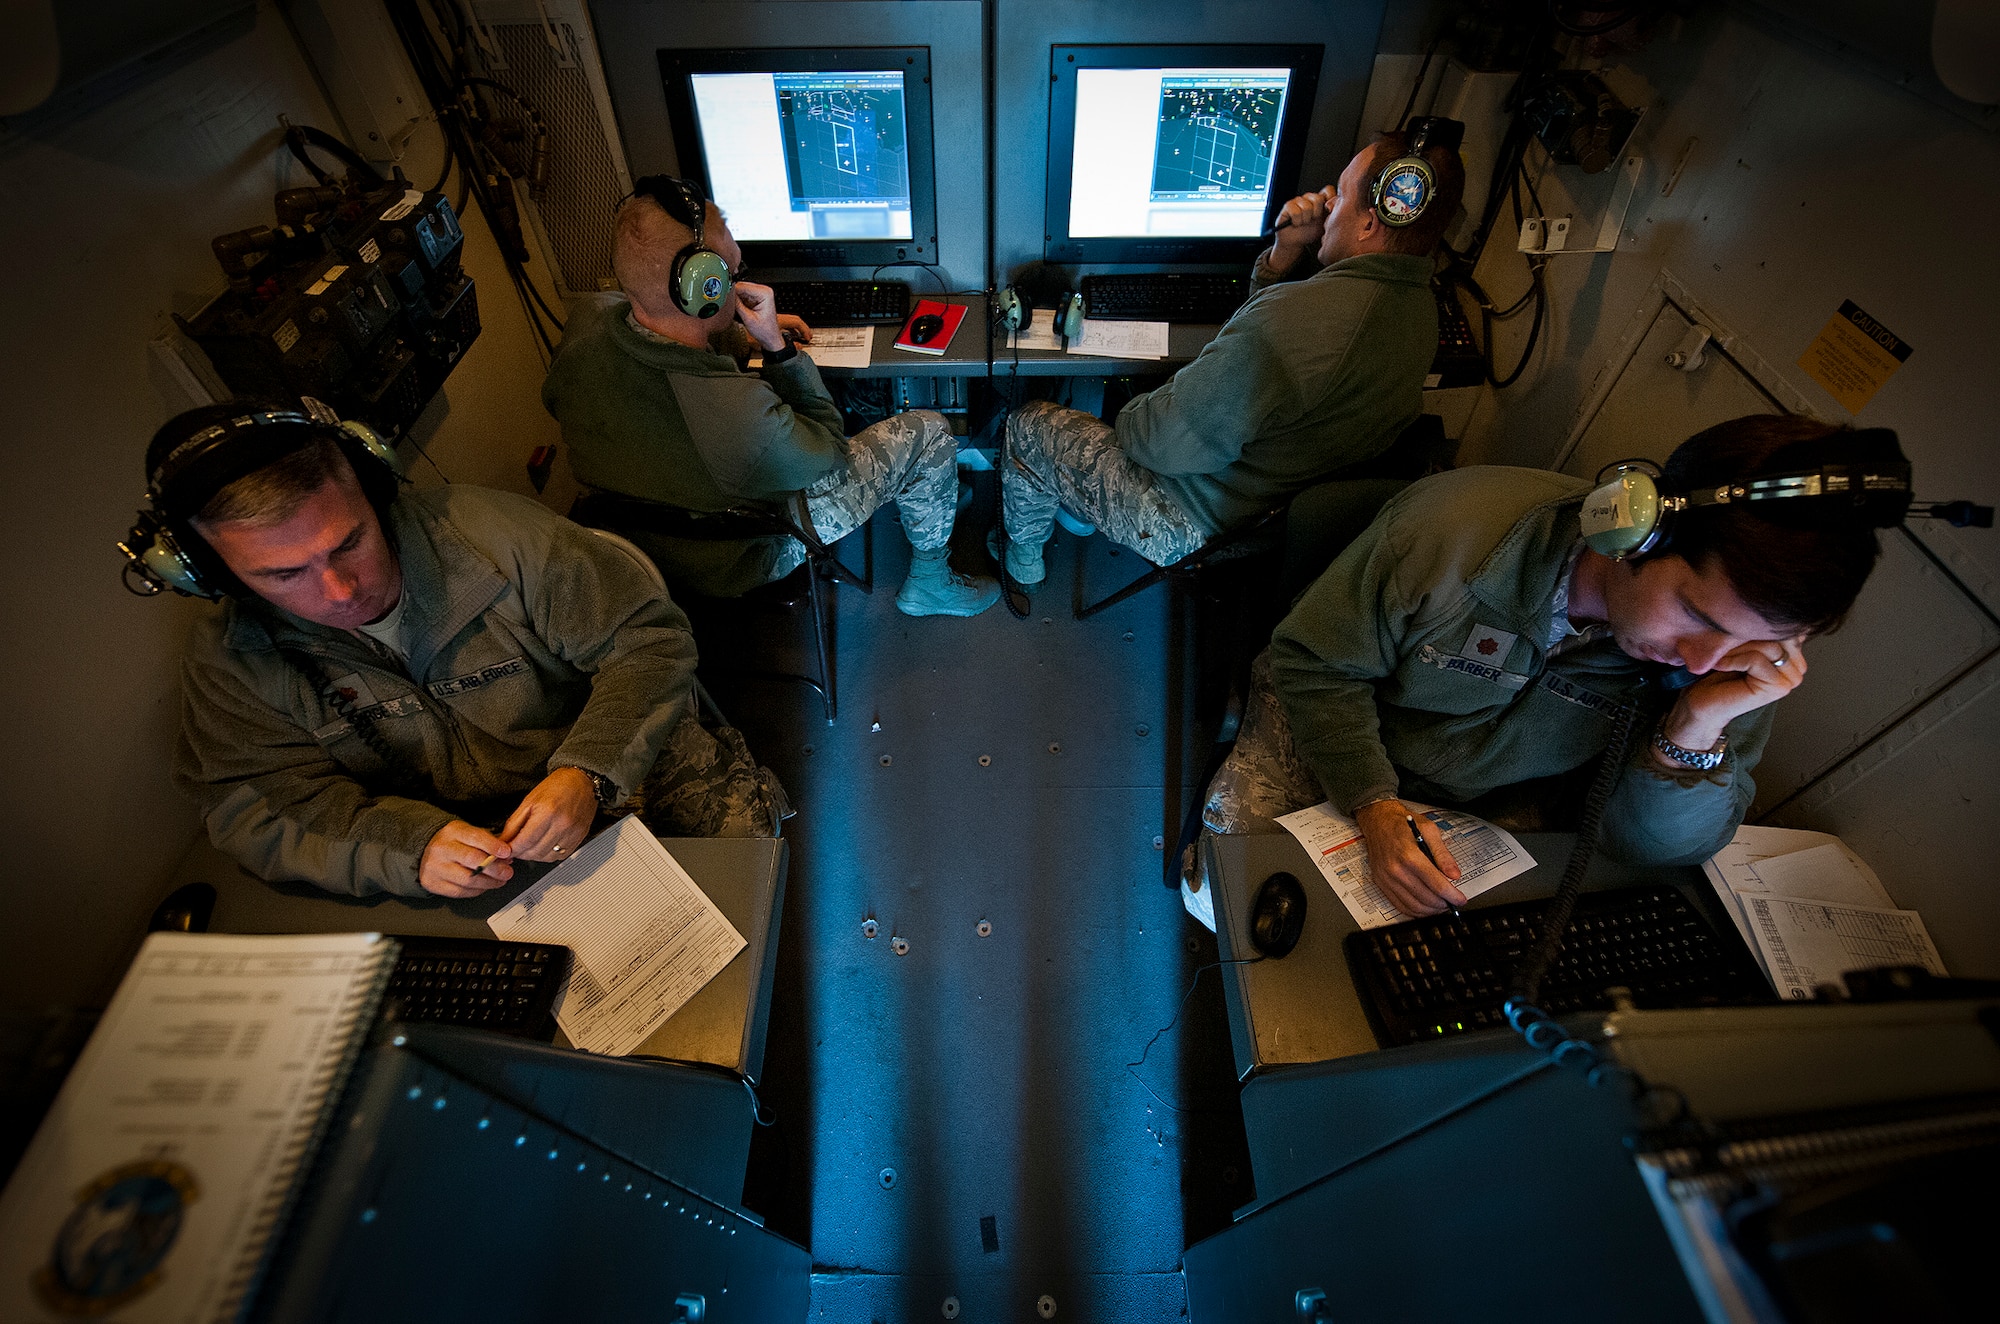 A 728th Air Control Squadron weapons team prepares before their squadron’s final mission Jan. 31 at Eglin Air Force Base, Fla.  The 62-year-old squadron, an air command and control unit, will be deactivated in May.  Their final mission was to control 33rd Fighter Wing F-35s for a tactical intercept mission.  (U.S. Air Force photo/Samuel King Jr.)